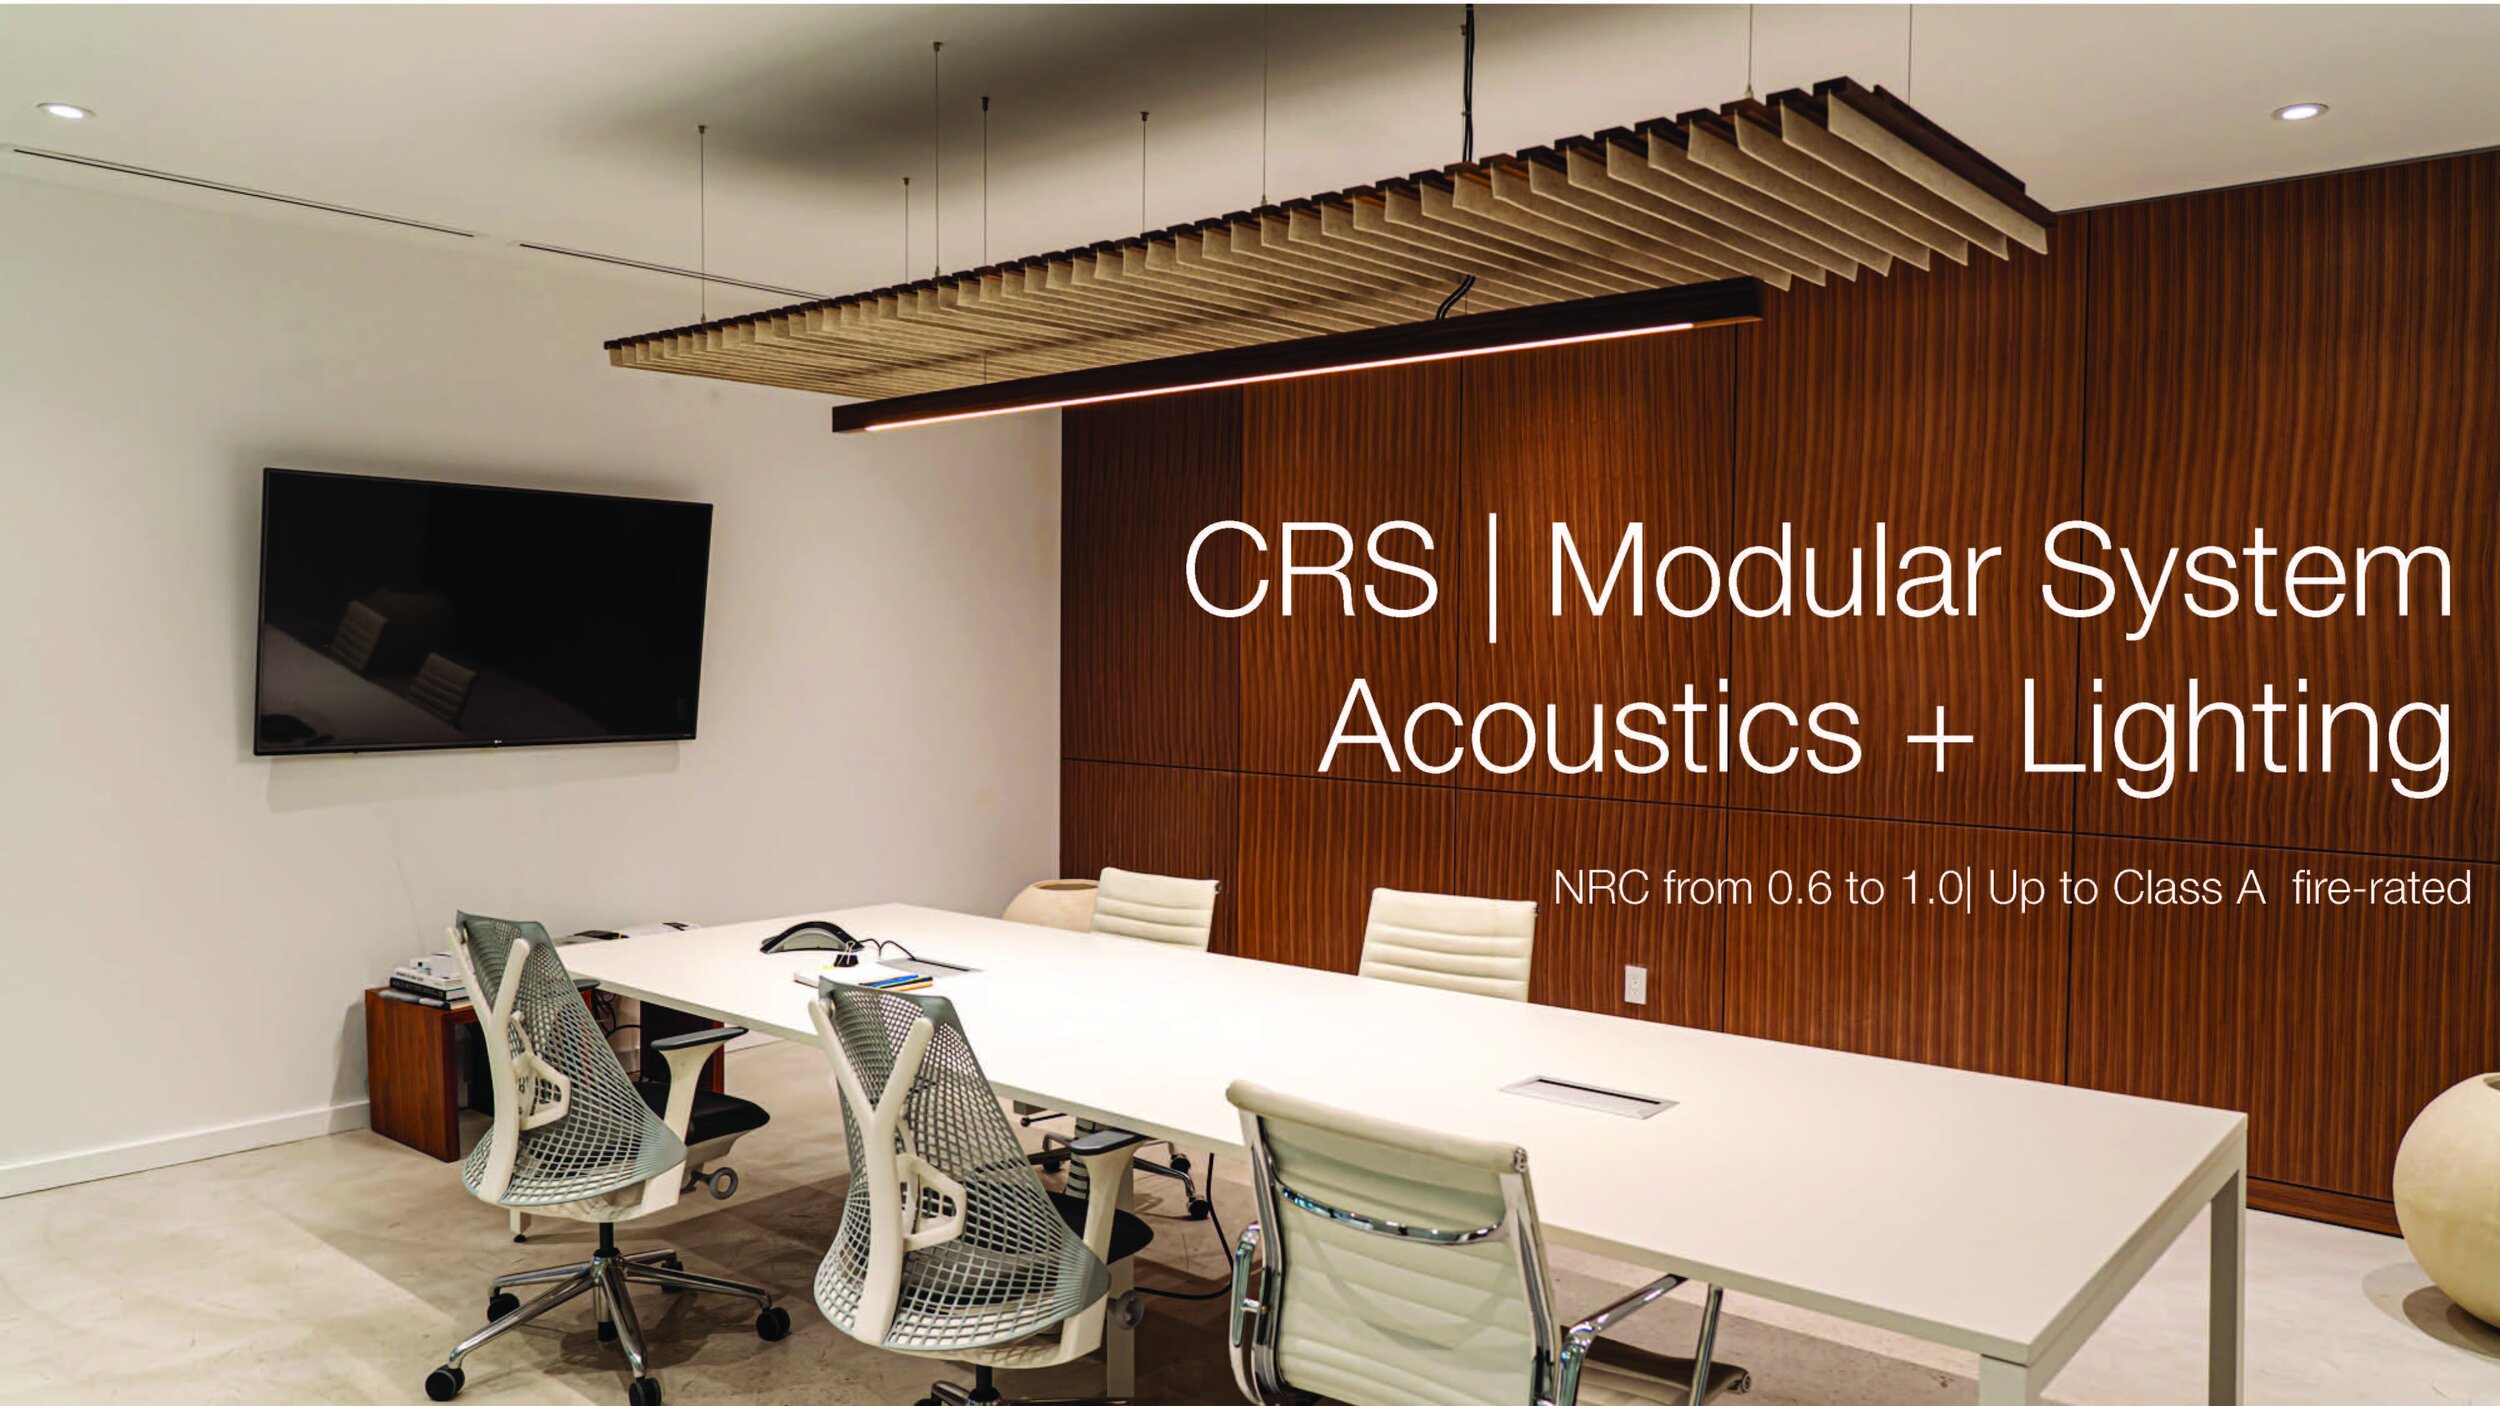  Meeting room acoustic system for offices and conference rooms with slat design and architectural detailing.  